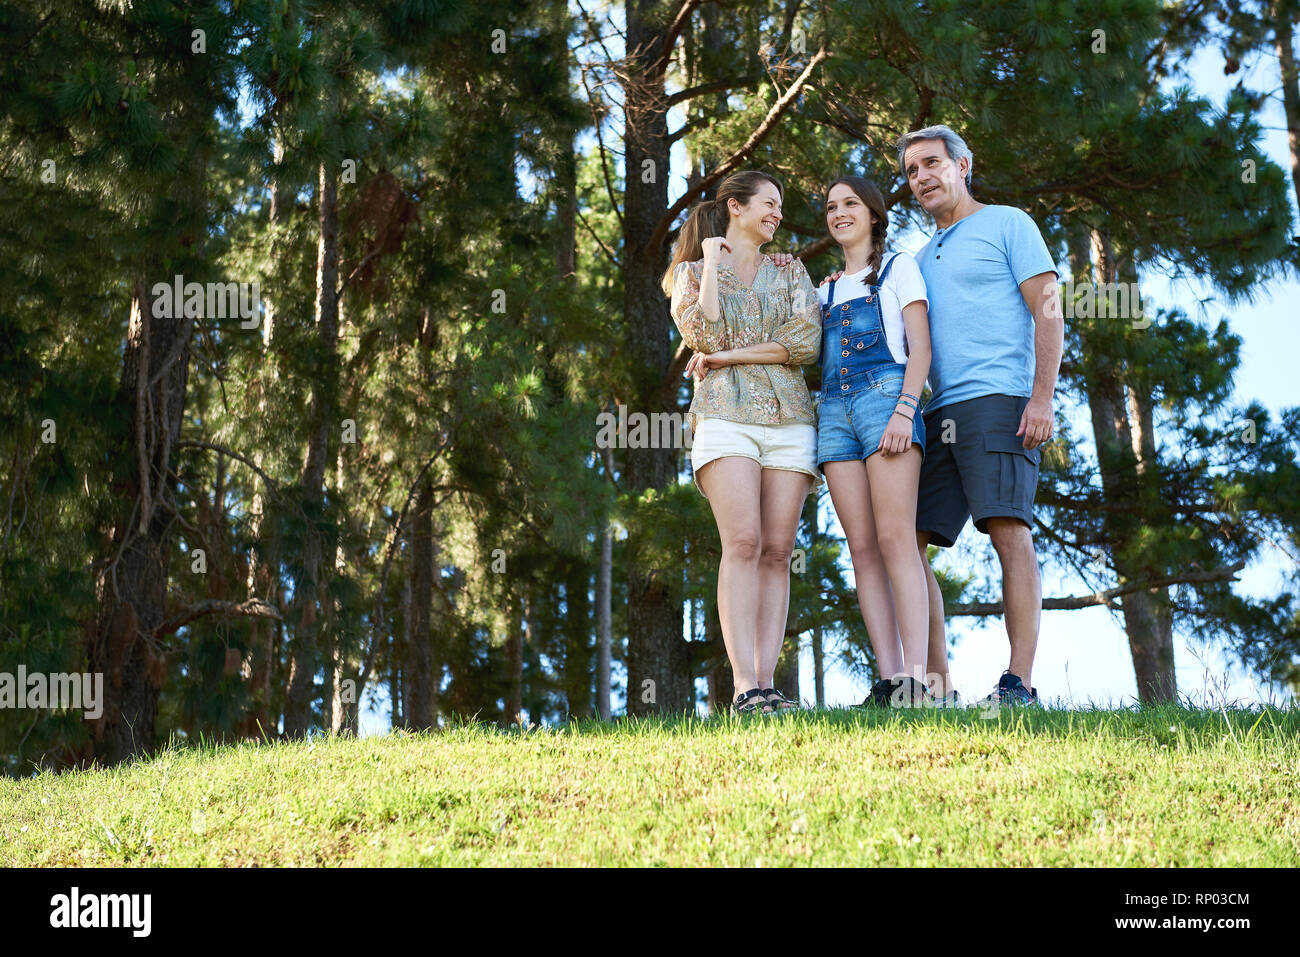 Family standing together on grassy hill Stock Photo